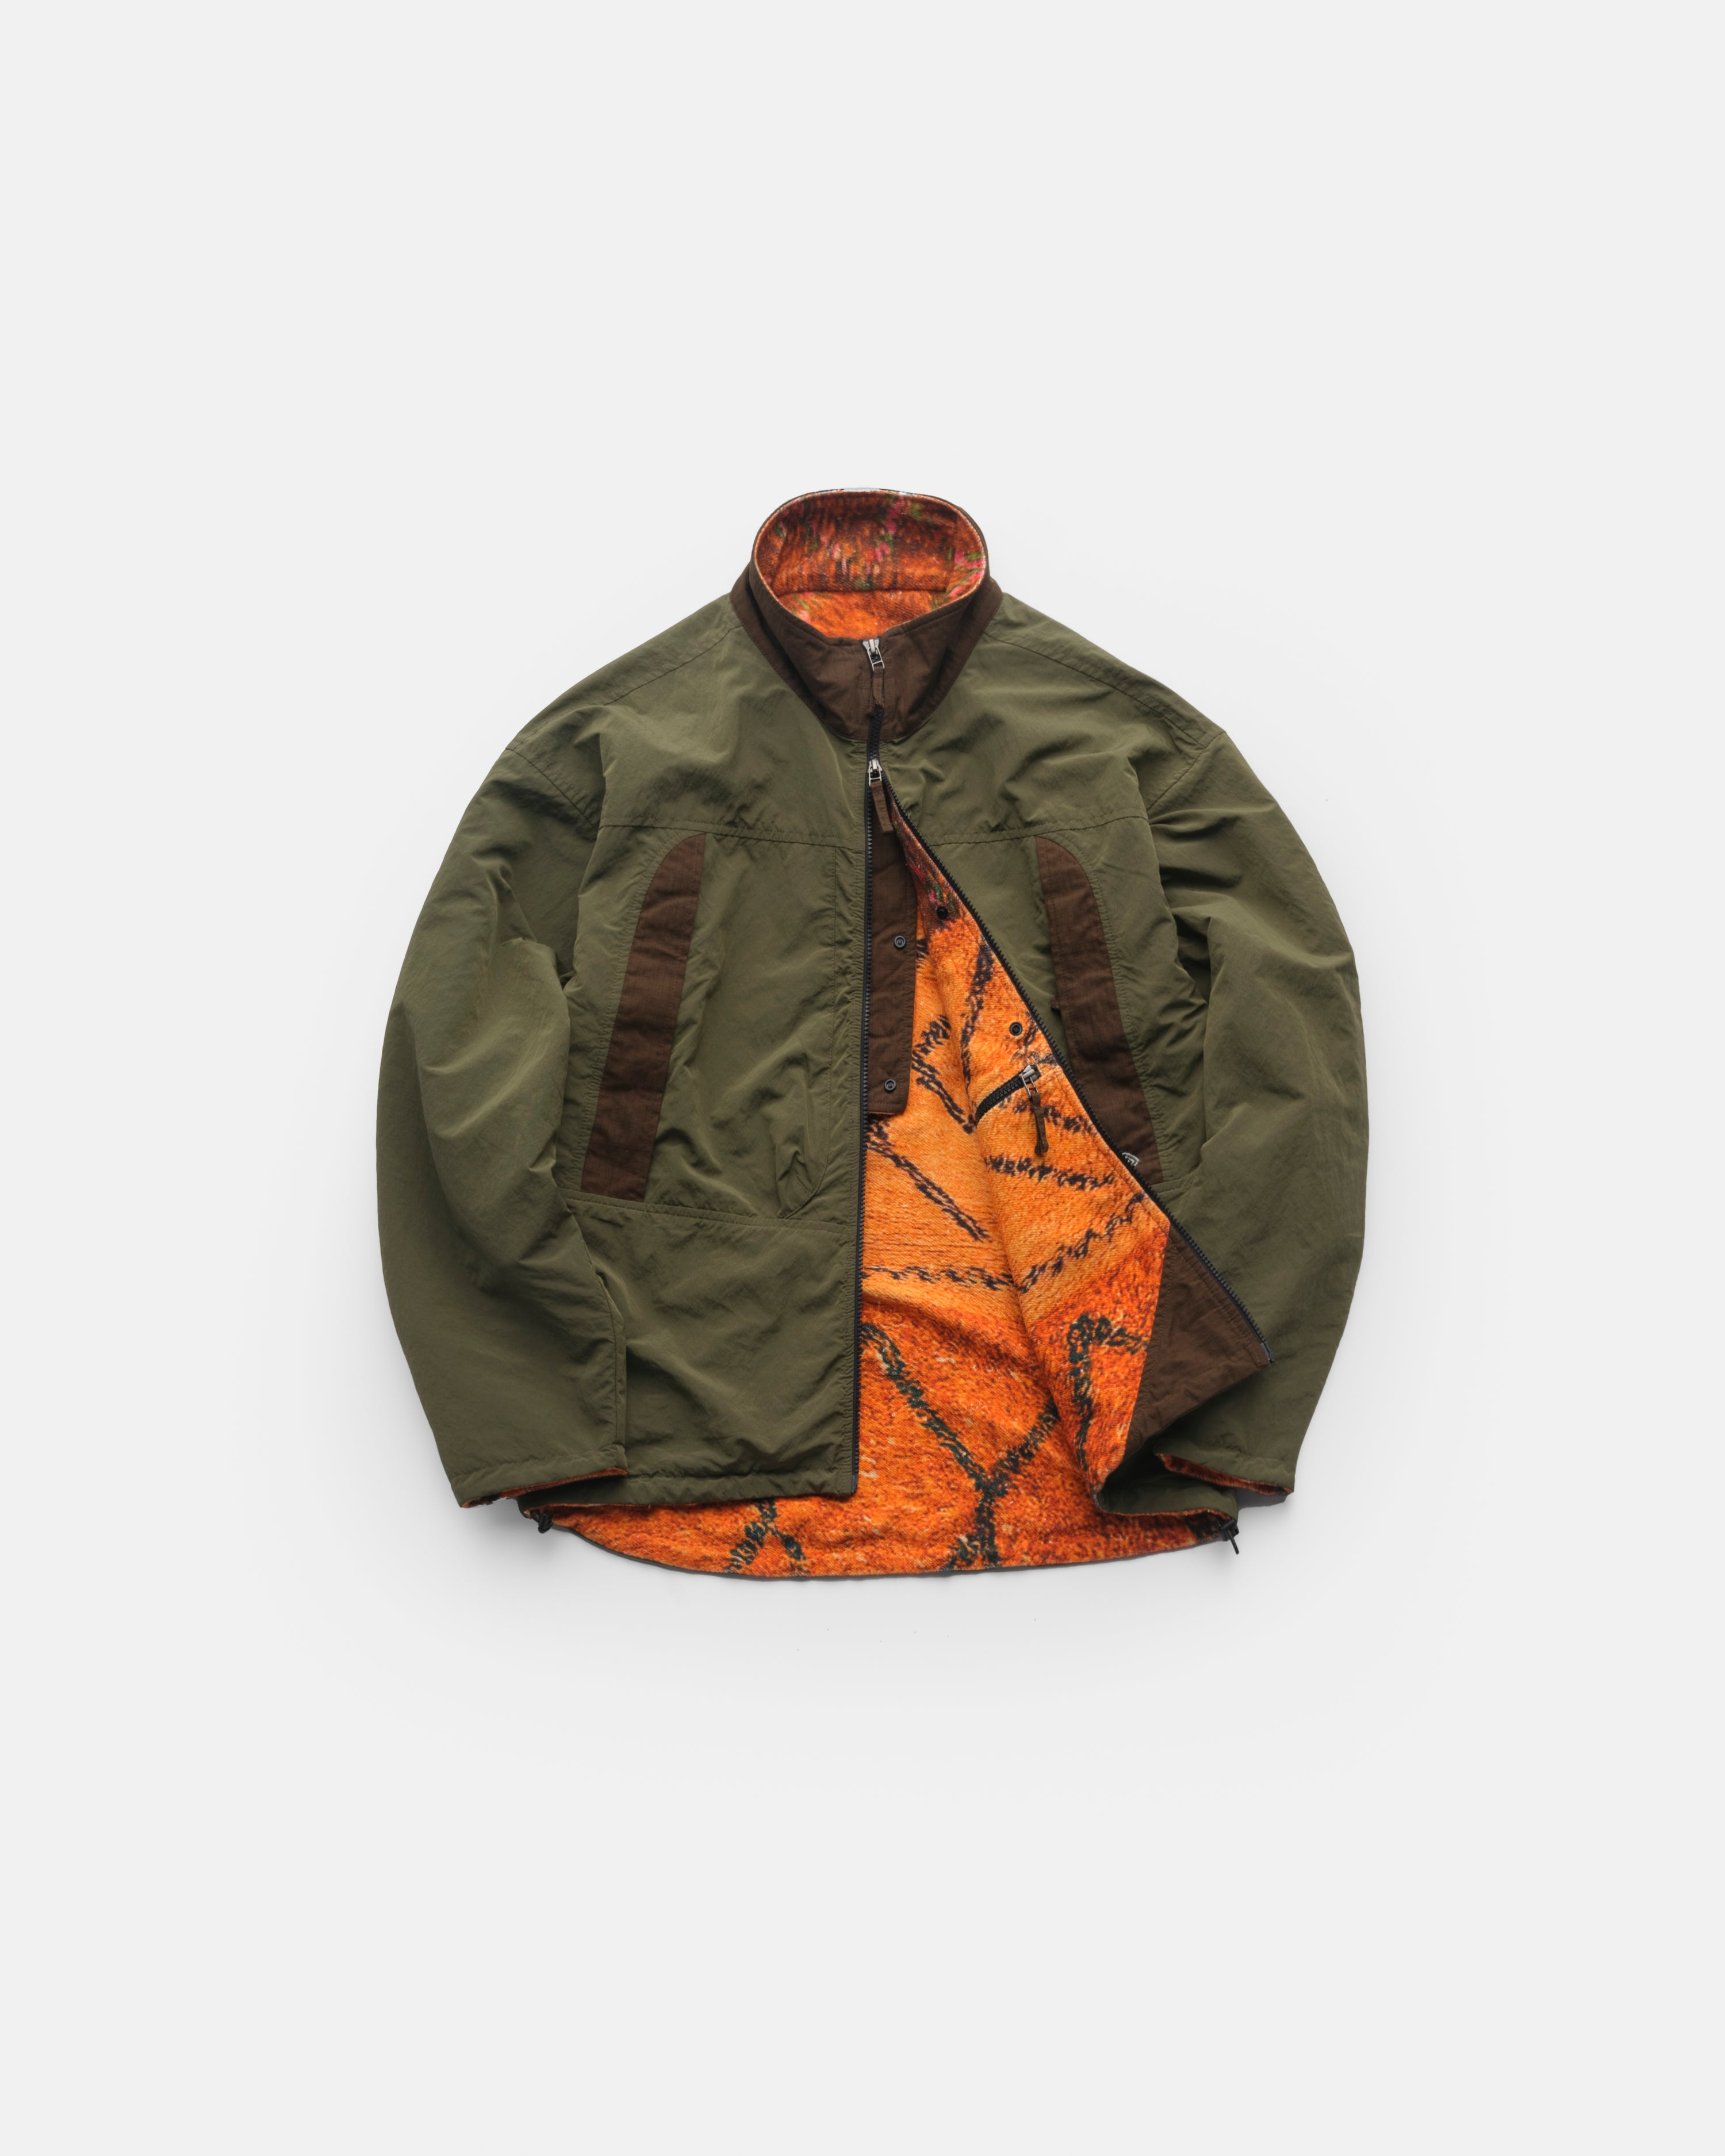 PLU REVERSIBLE MONSTER JACKET - O.D. GREEN WATER-REPELLENT MICRO RIPSTOP NYLON / GINGER TROMPE L'OEIL AZILAL REVERSE LOOPBACK TERRY